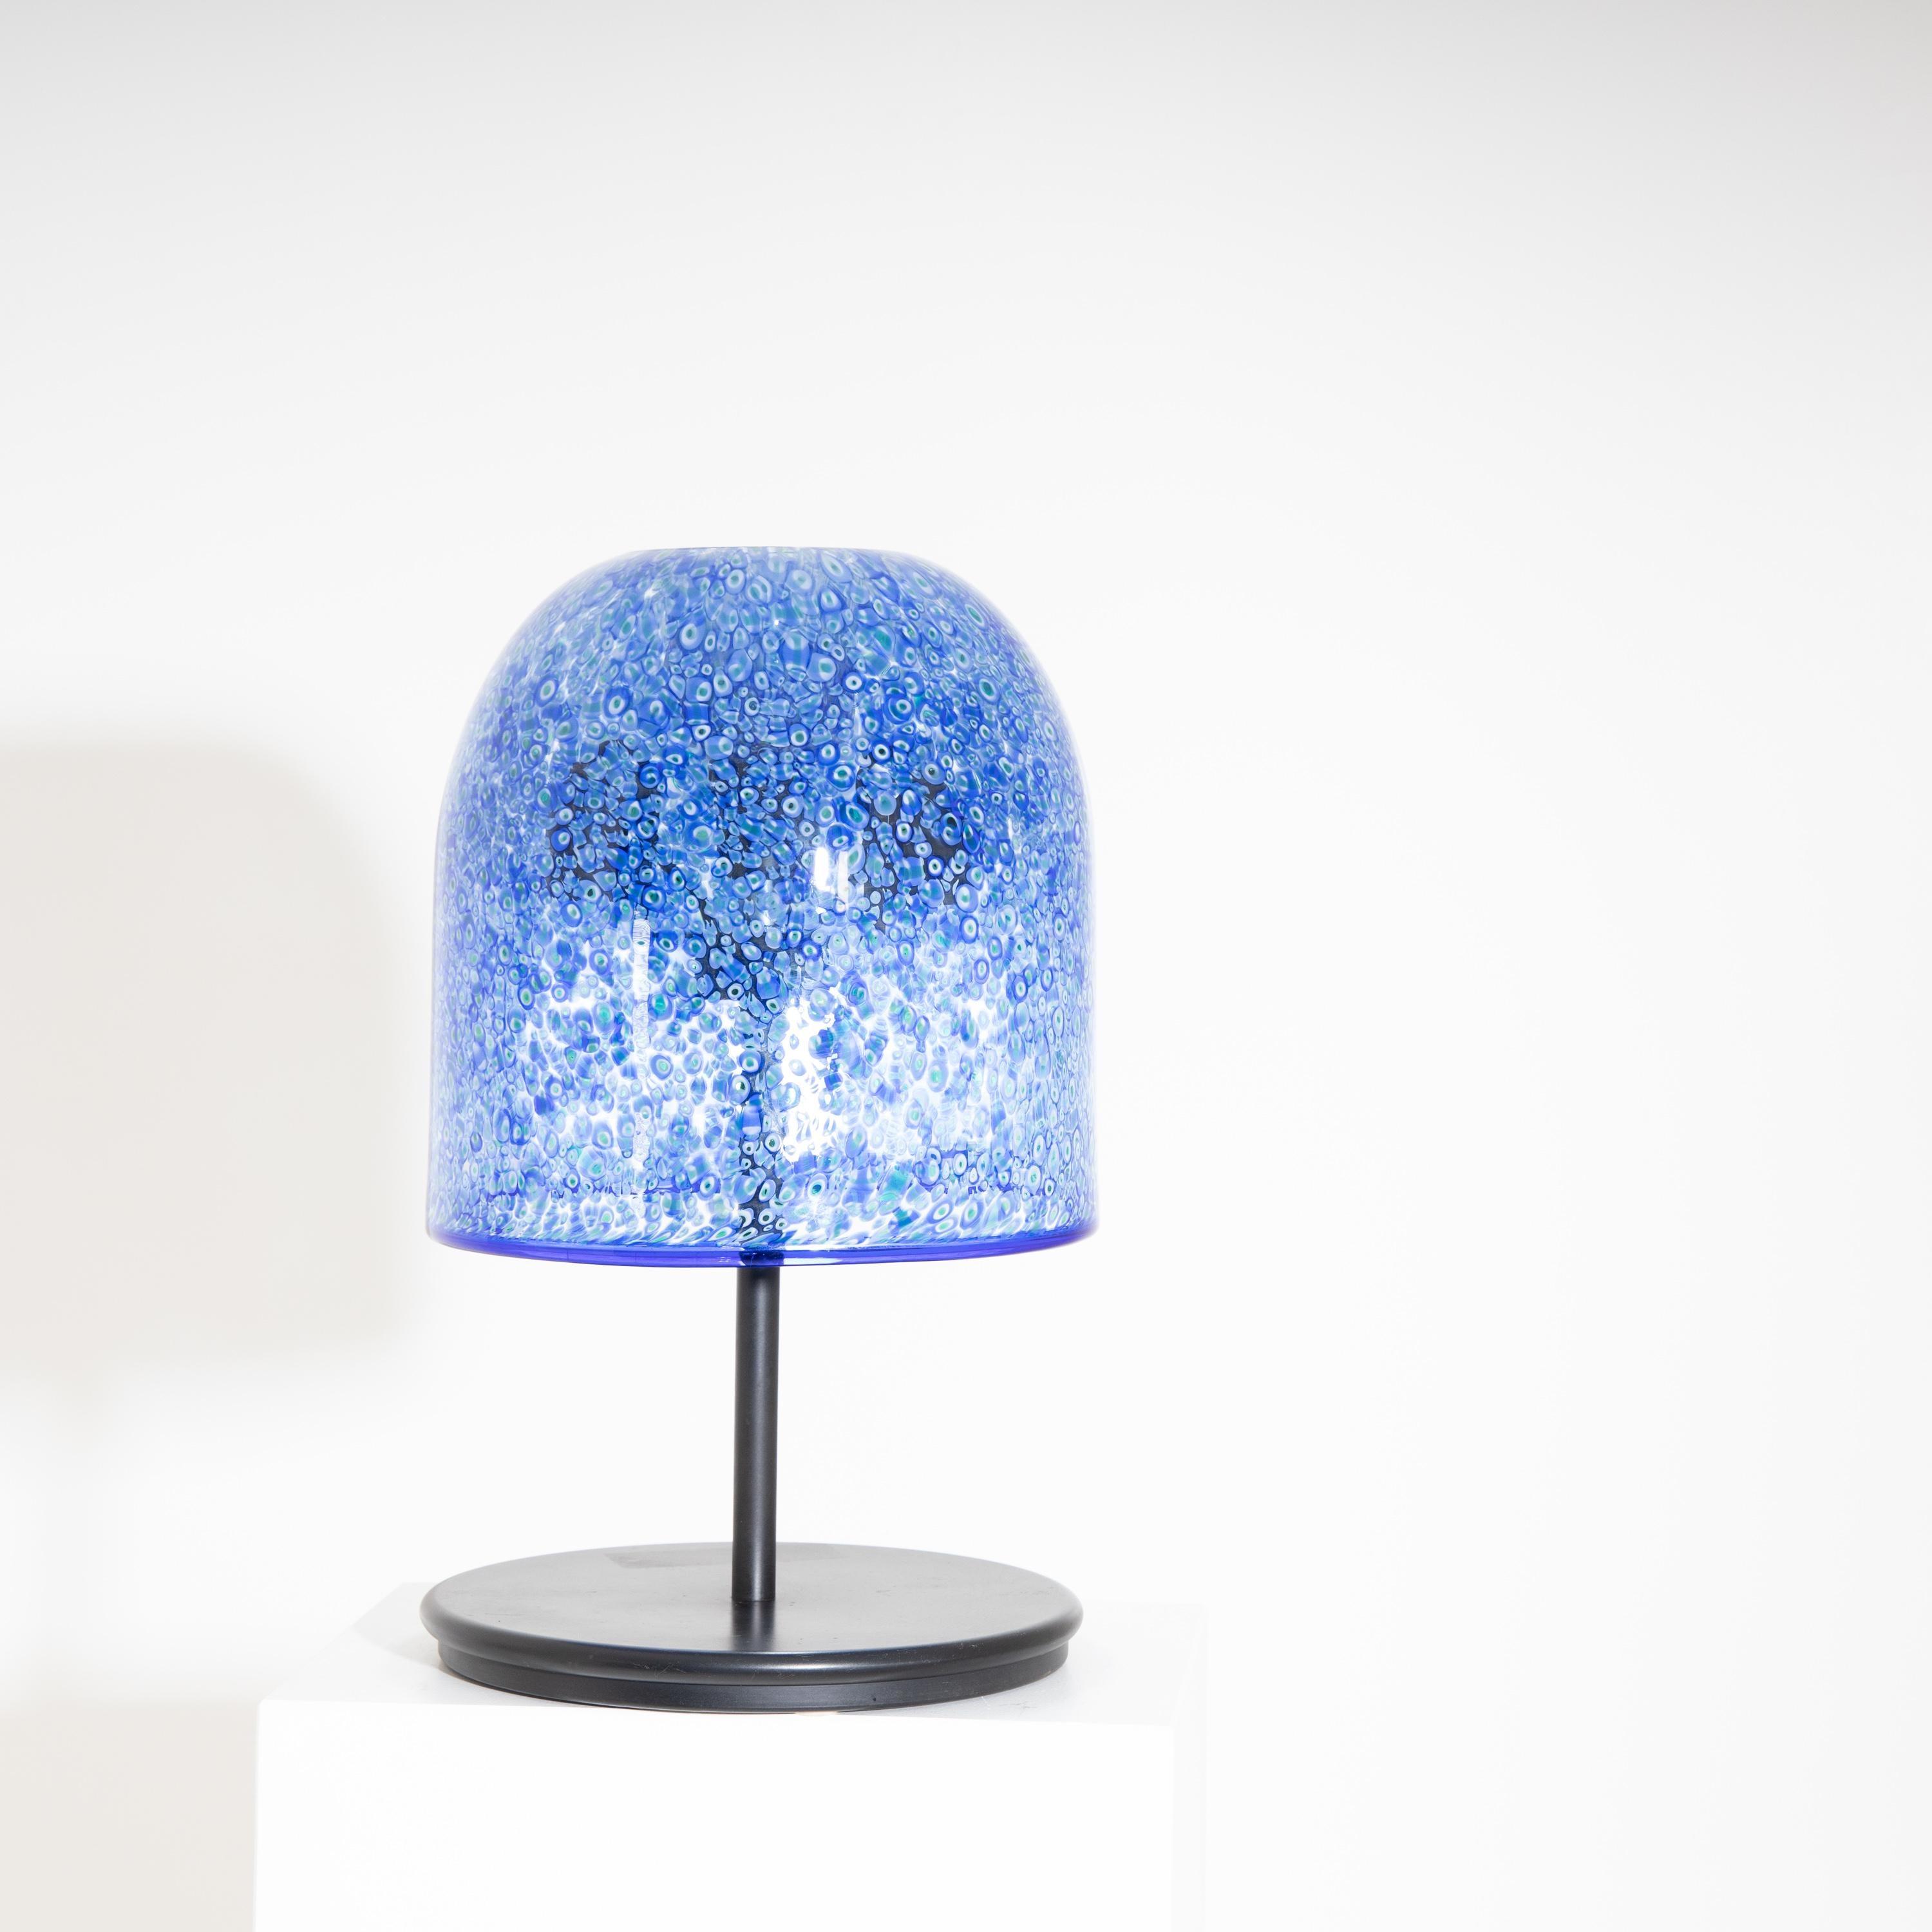 Table lamp standing on a round black metal base with a large bell-shaped glass shade in blue, made in Millefiori technique.
For the electrification we assume no liability and no warranty.